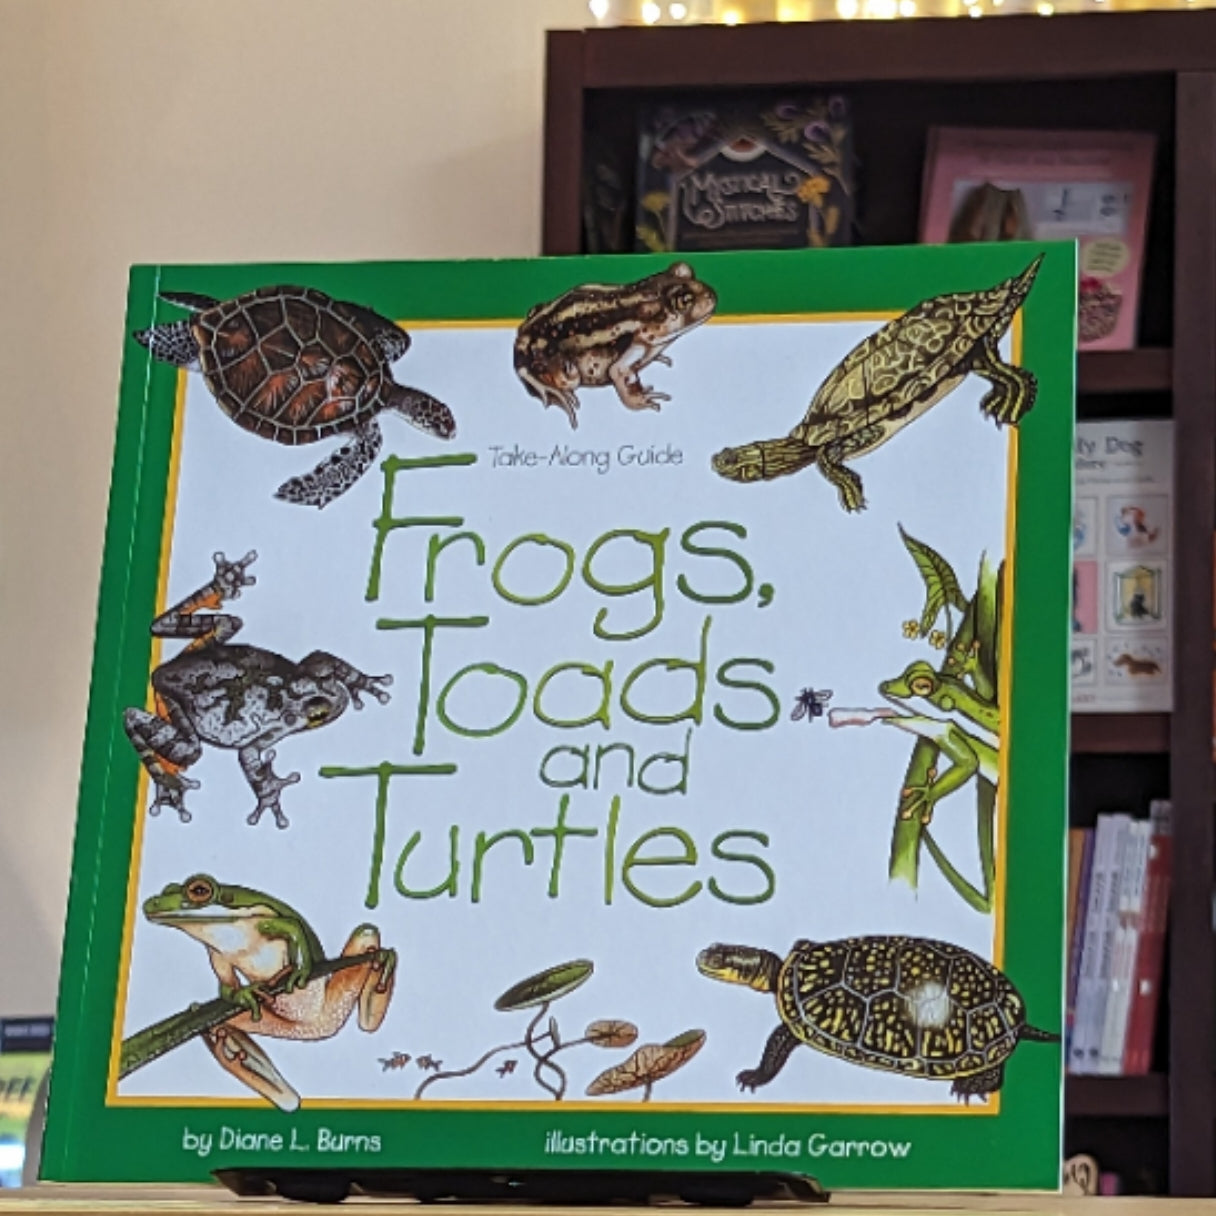 Frogs, Toads & Turtles: Take Along Guide (Take Along Guides)